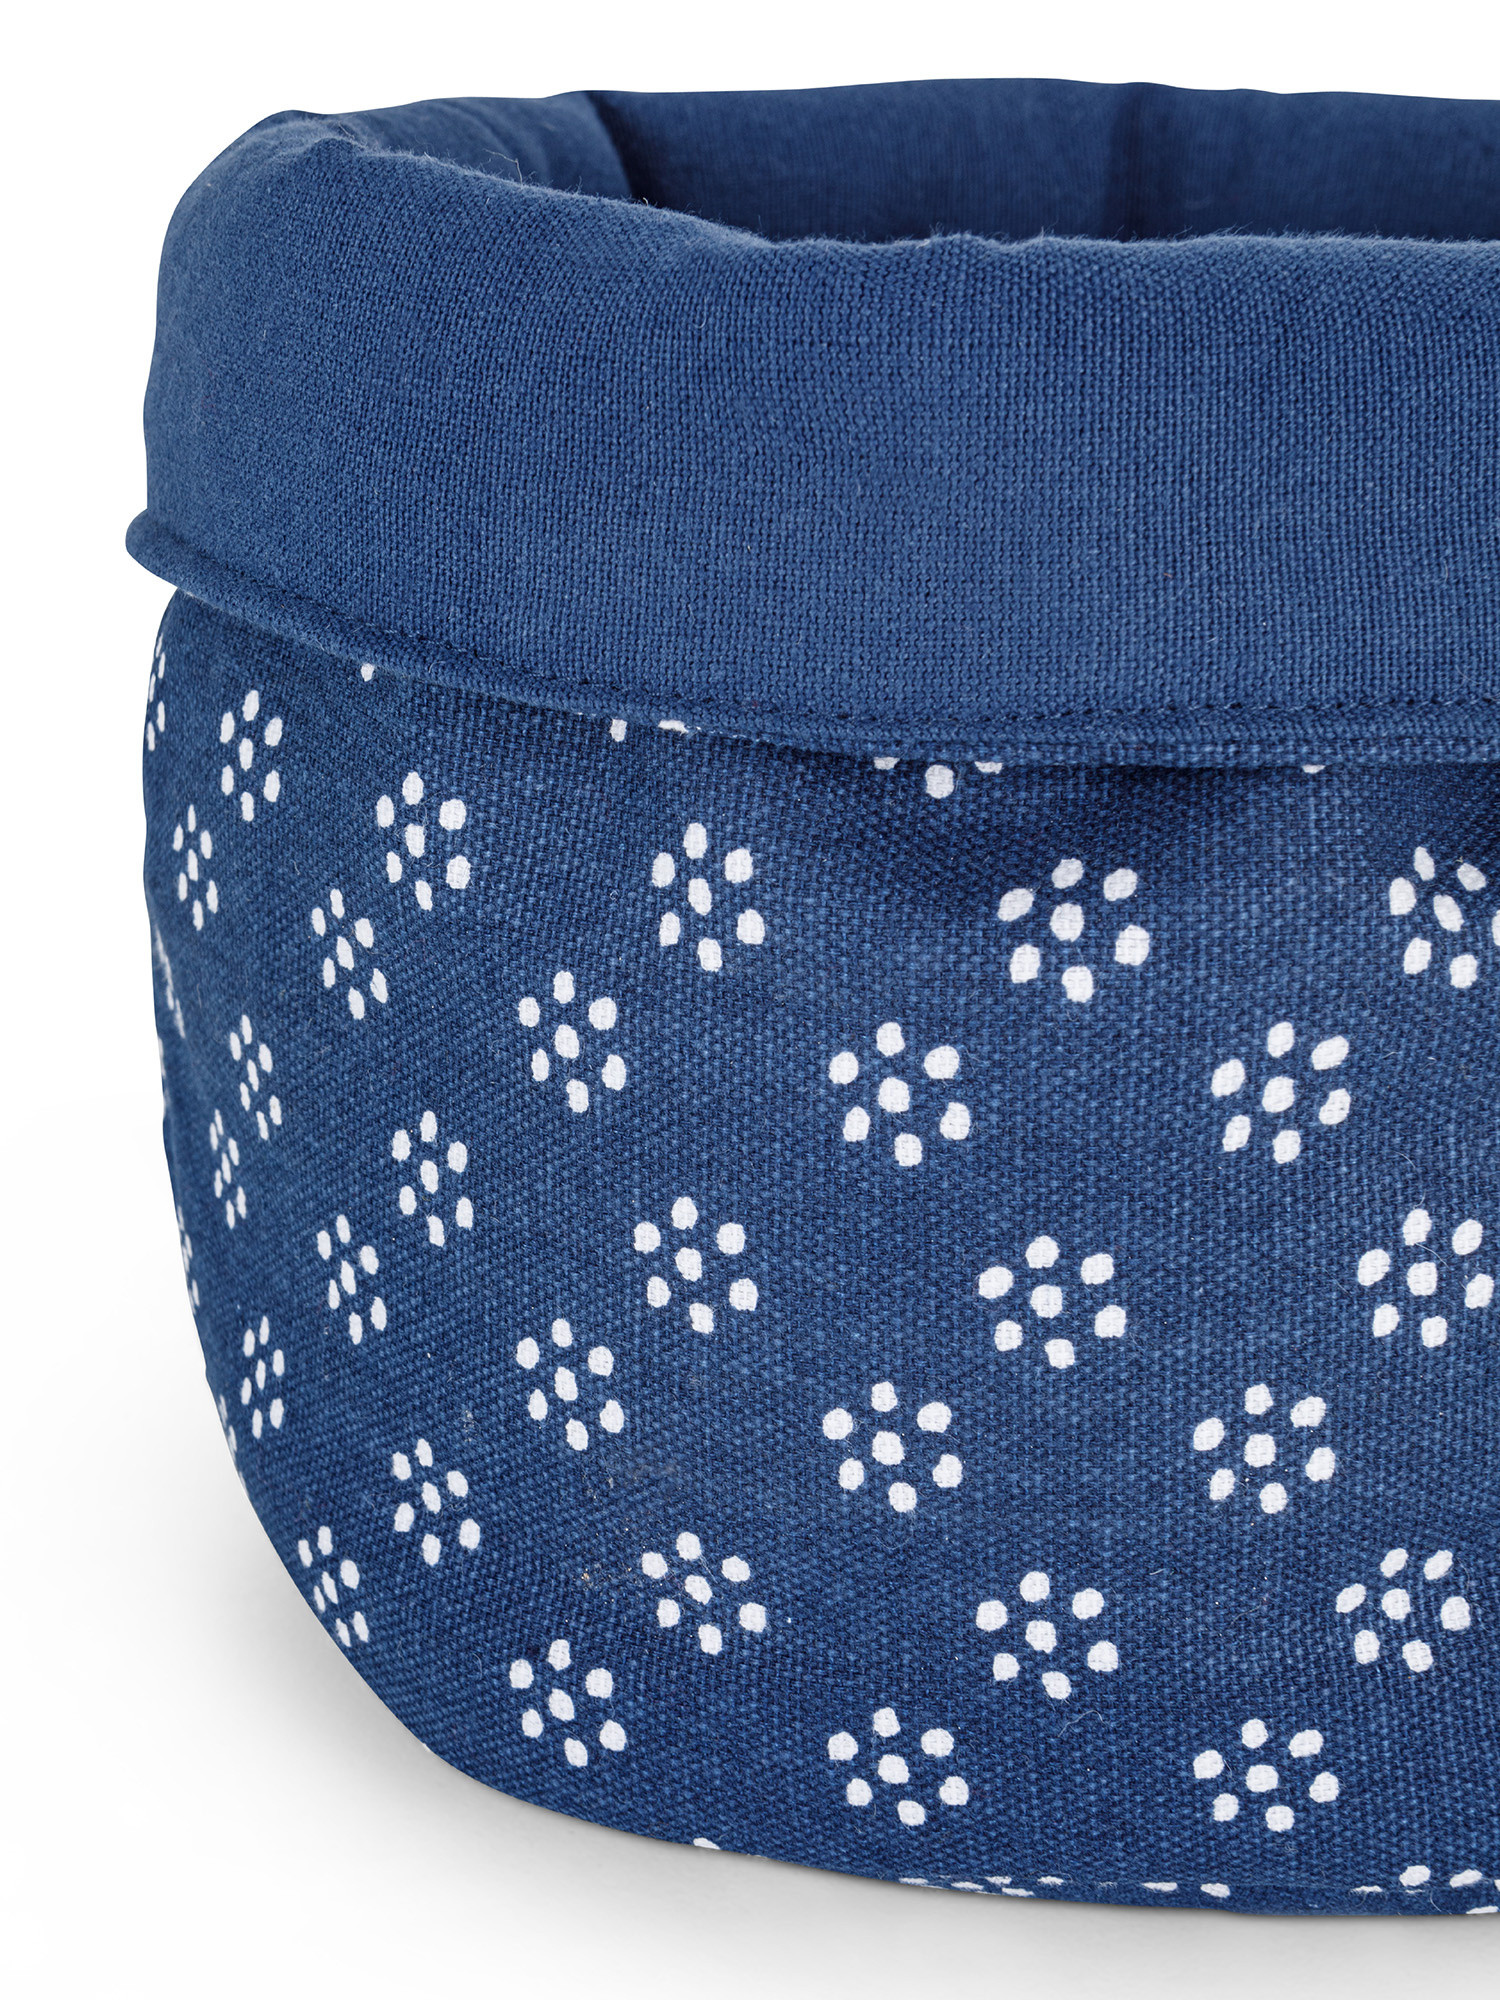 Round 100% cotton basket with dots print, Blue, large image number 1